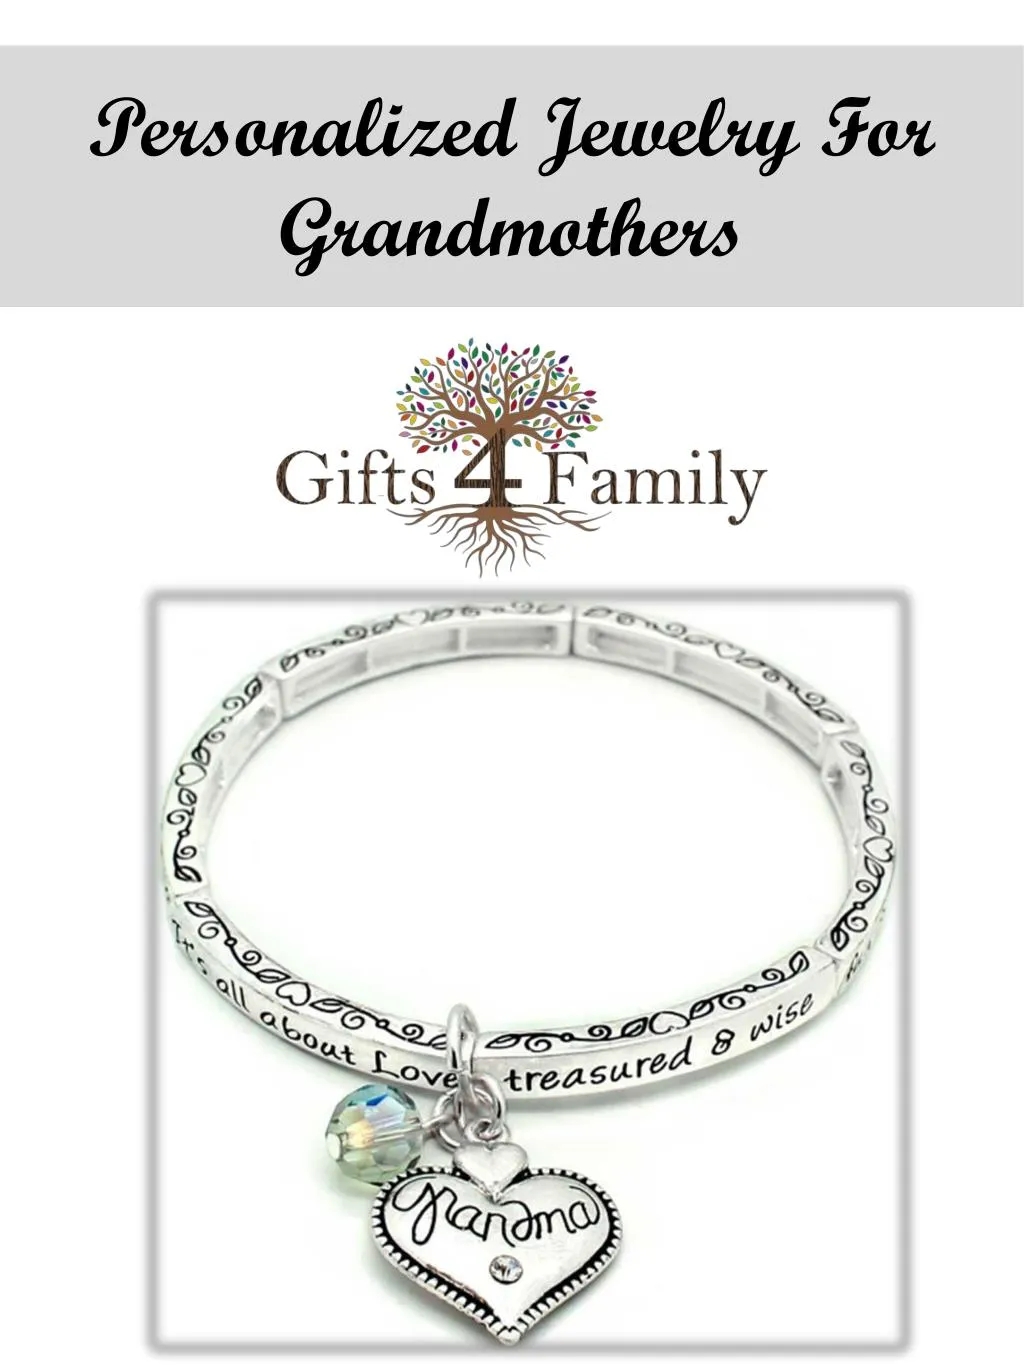 personalized jewelry for grandmothers